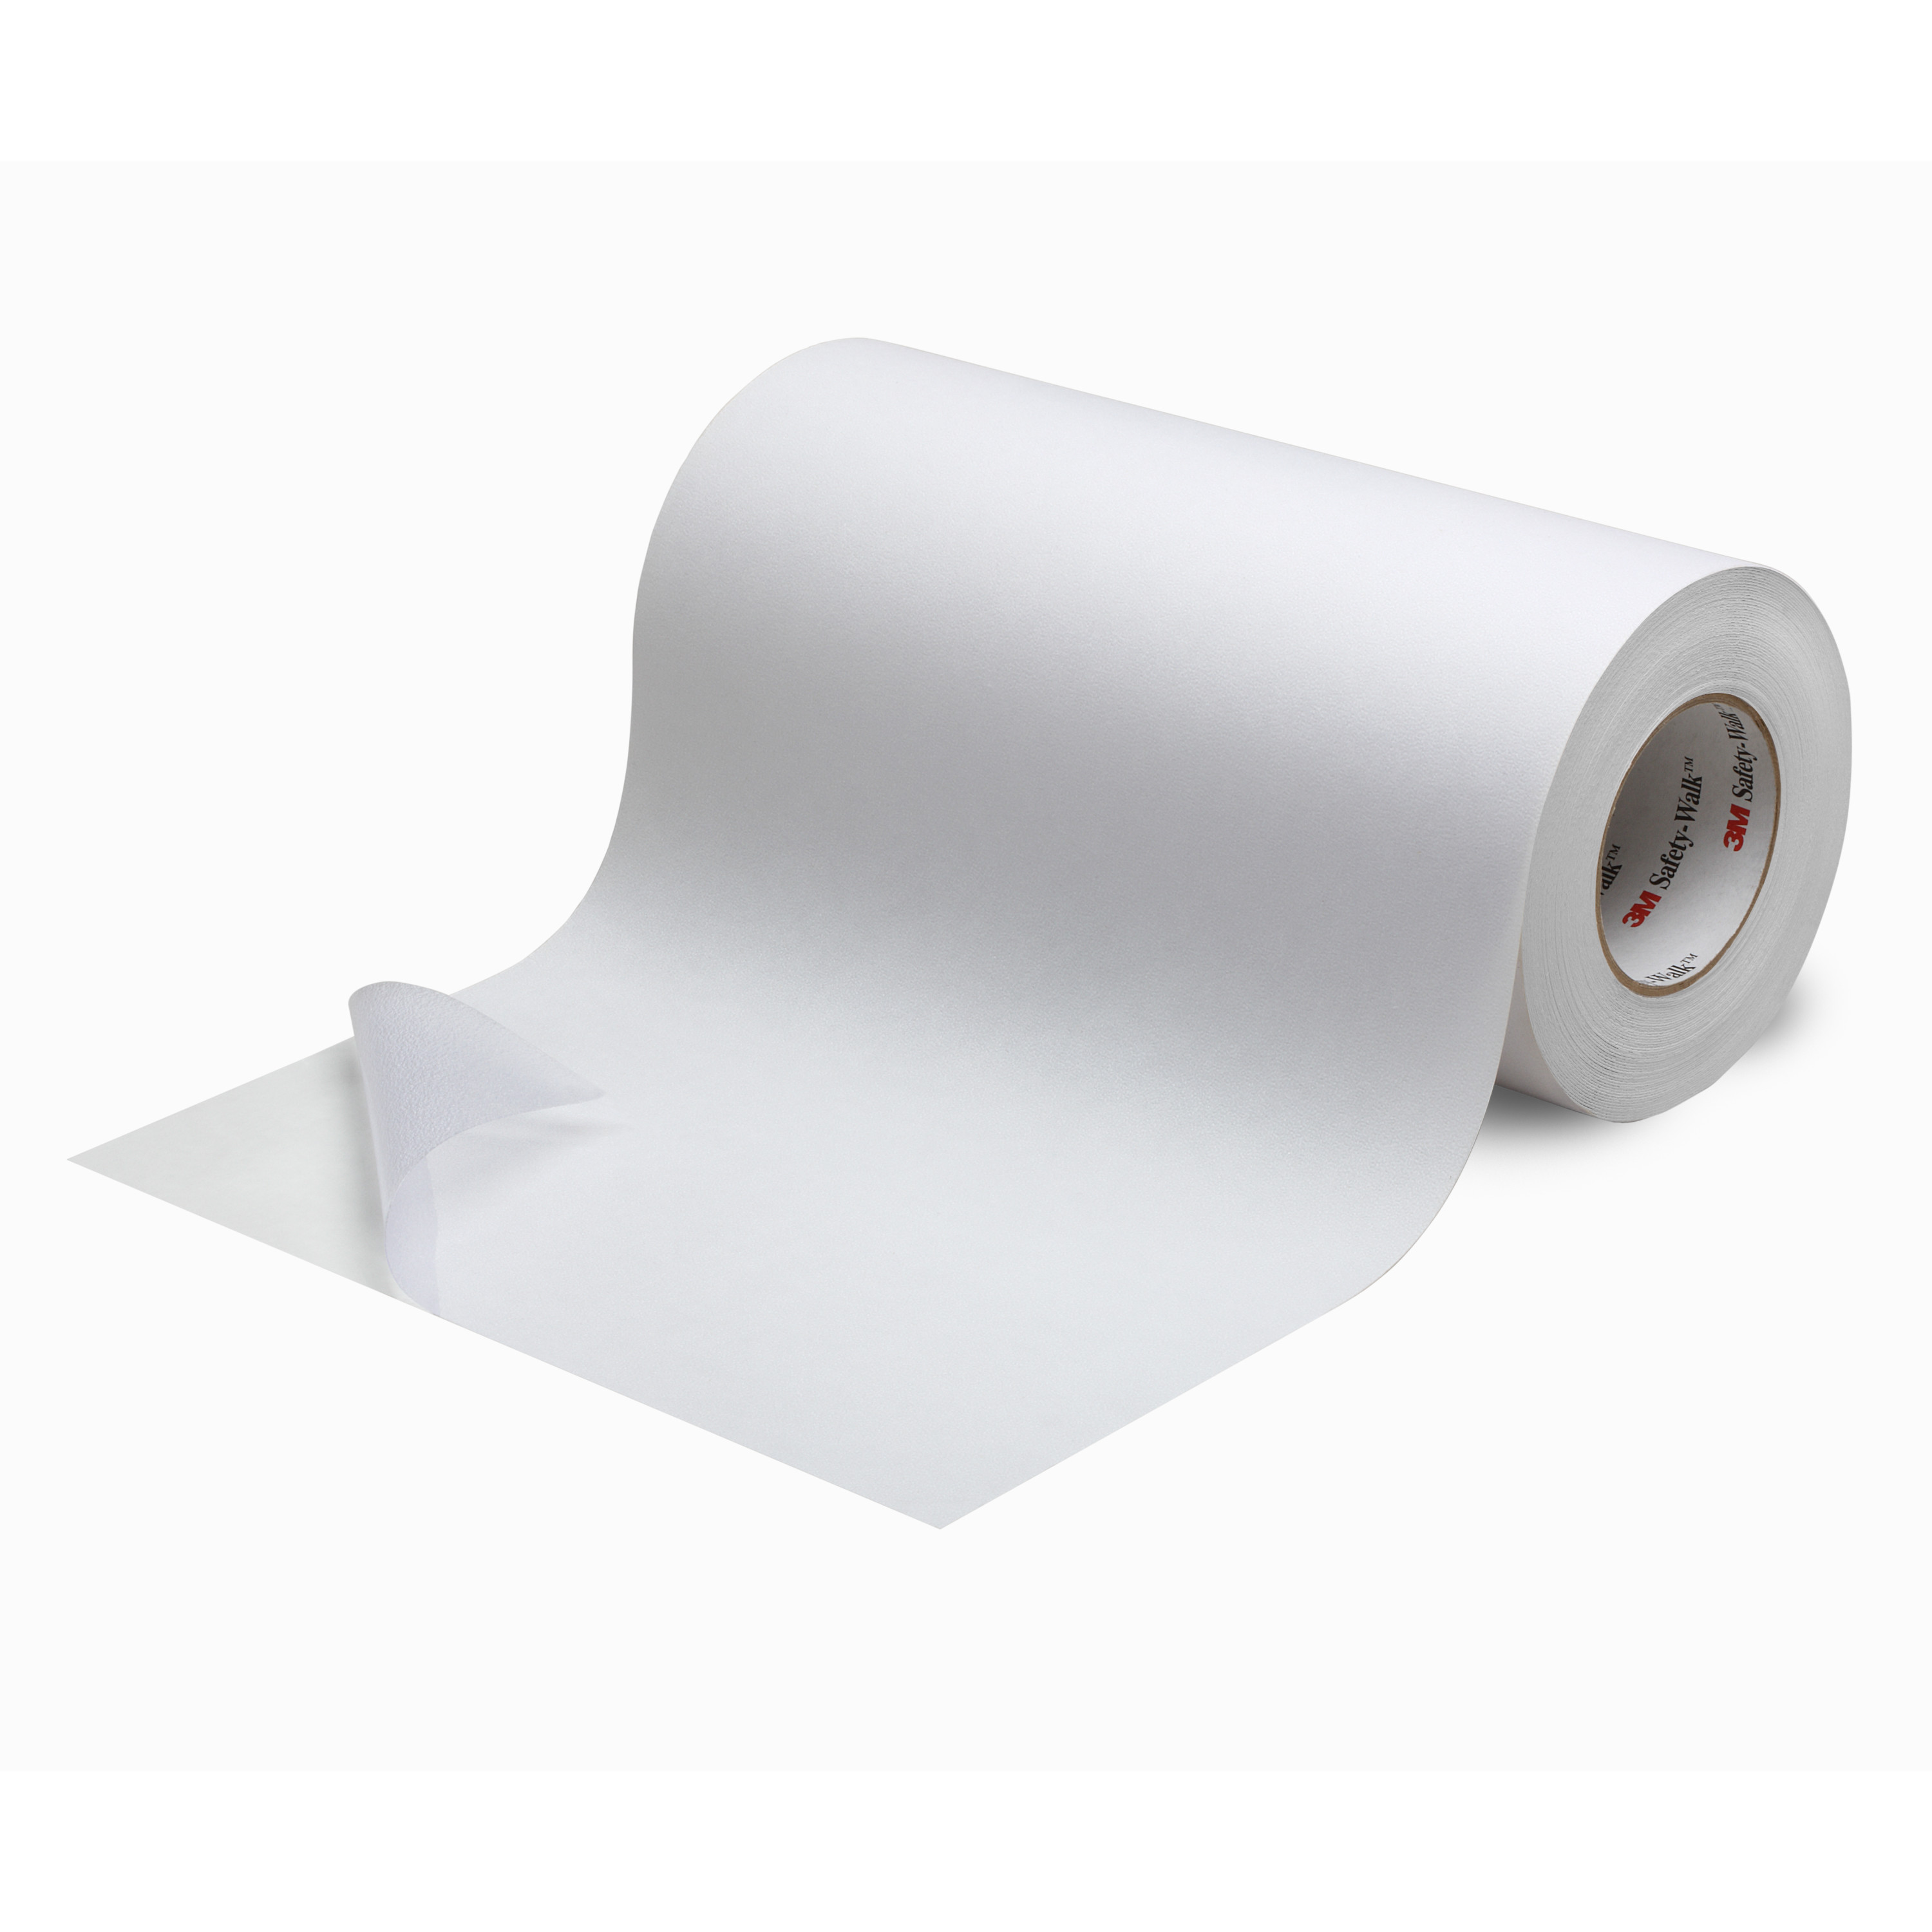 3M™ Safety-Walk™ Slip-Resistant Fine Resslent Tapes & Treads 220, Clear,
48 in x 60 ft